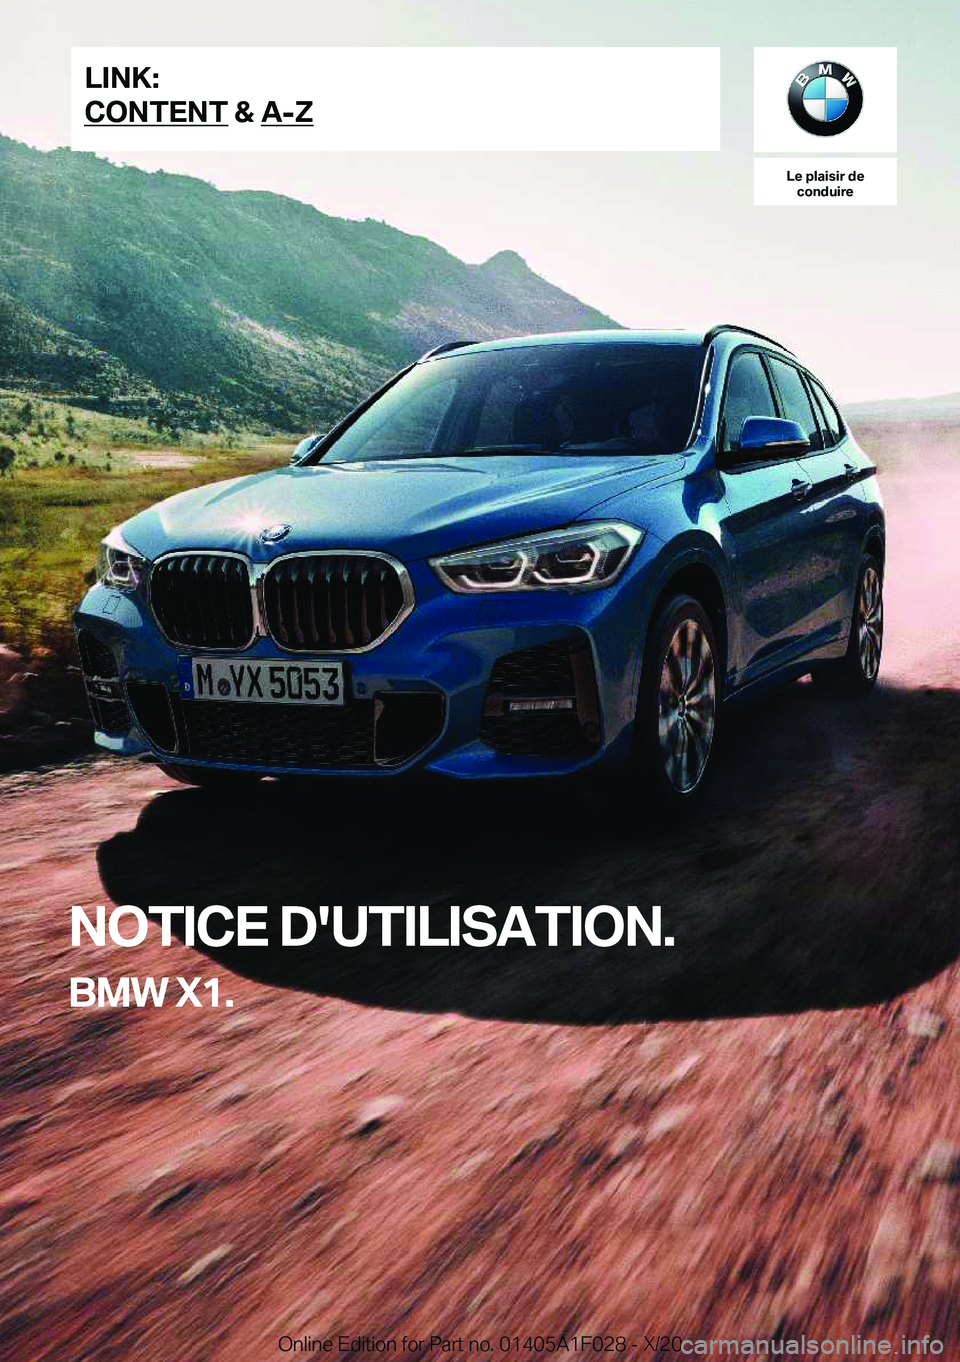 BMW X1 2021  Notices Demploi (in French) �L�e��p�l�a�i�s�i�r��d�e�c�o�n�d�u�i�r�e
�N�O�T�I�C�E��D�'�U�T�I�L�I�S�A�T�I�O�N�.
�B�M�W��X�1�.�L�I�N�K�:
�C�O�N�T�E�N�T��&��A�-�Z�O�n�l�i�n�e��E�d�i�t�i�o�n��f�o�r��P�a�r�t��n�o�.��0�